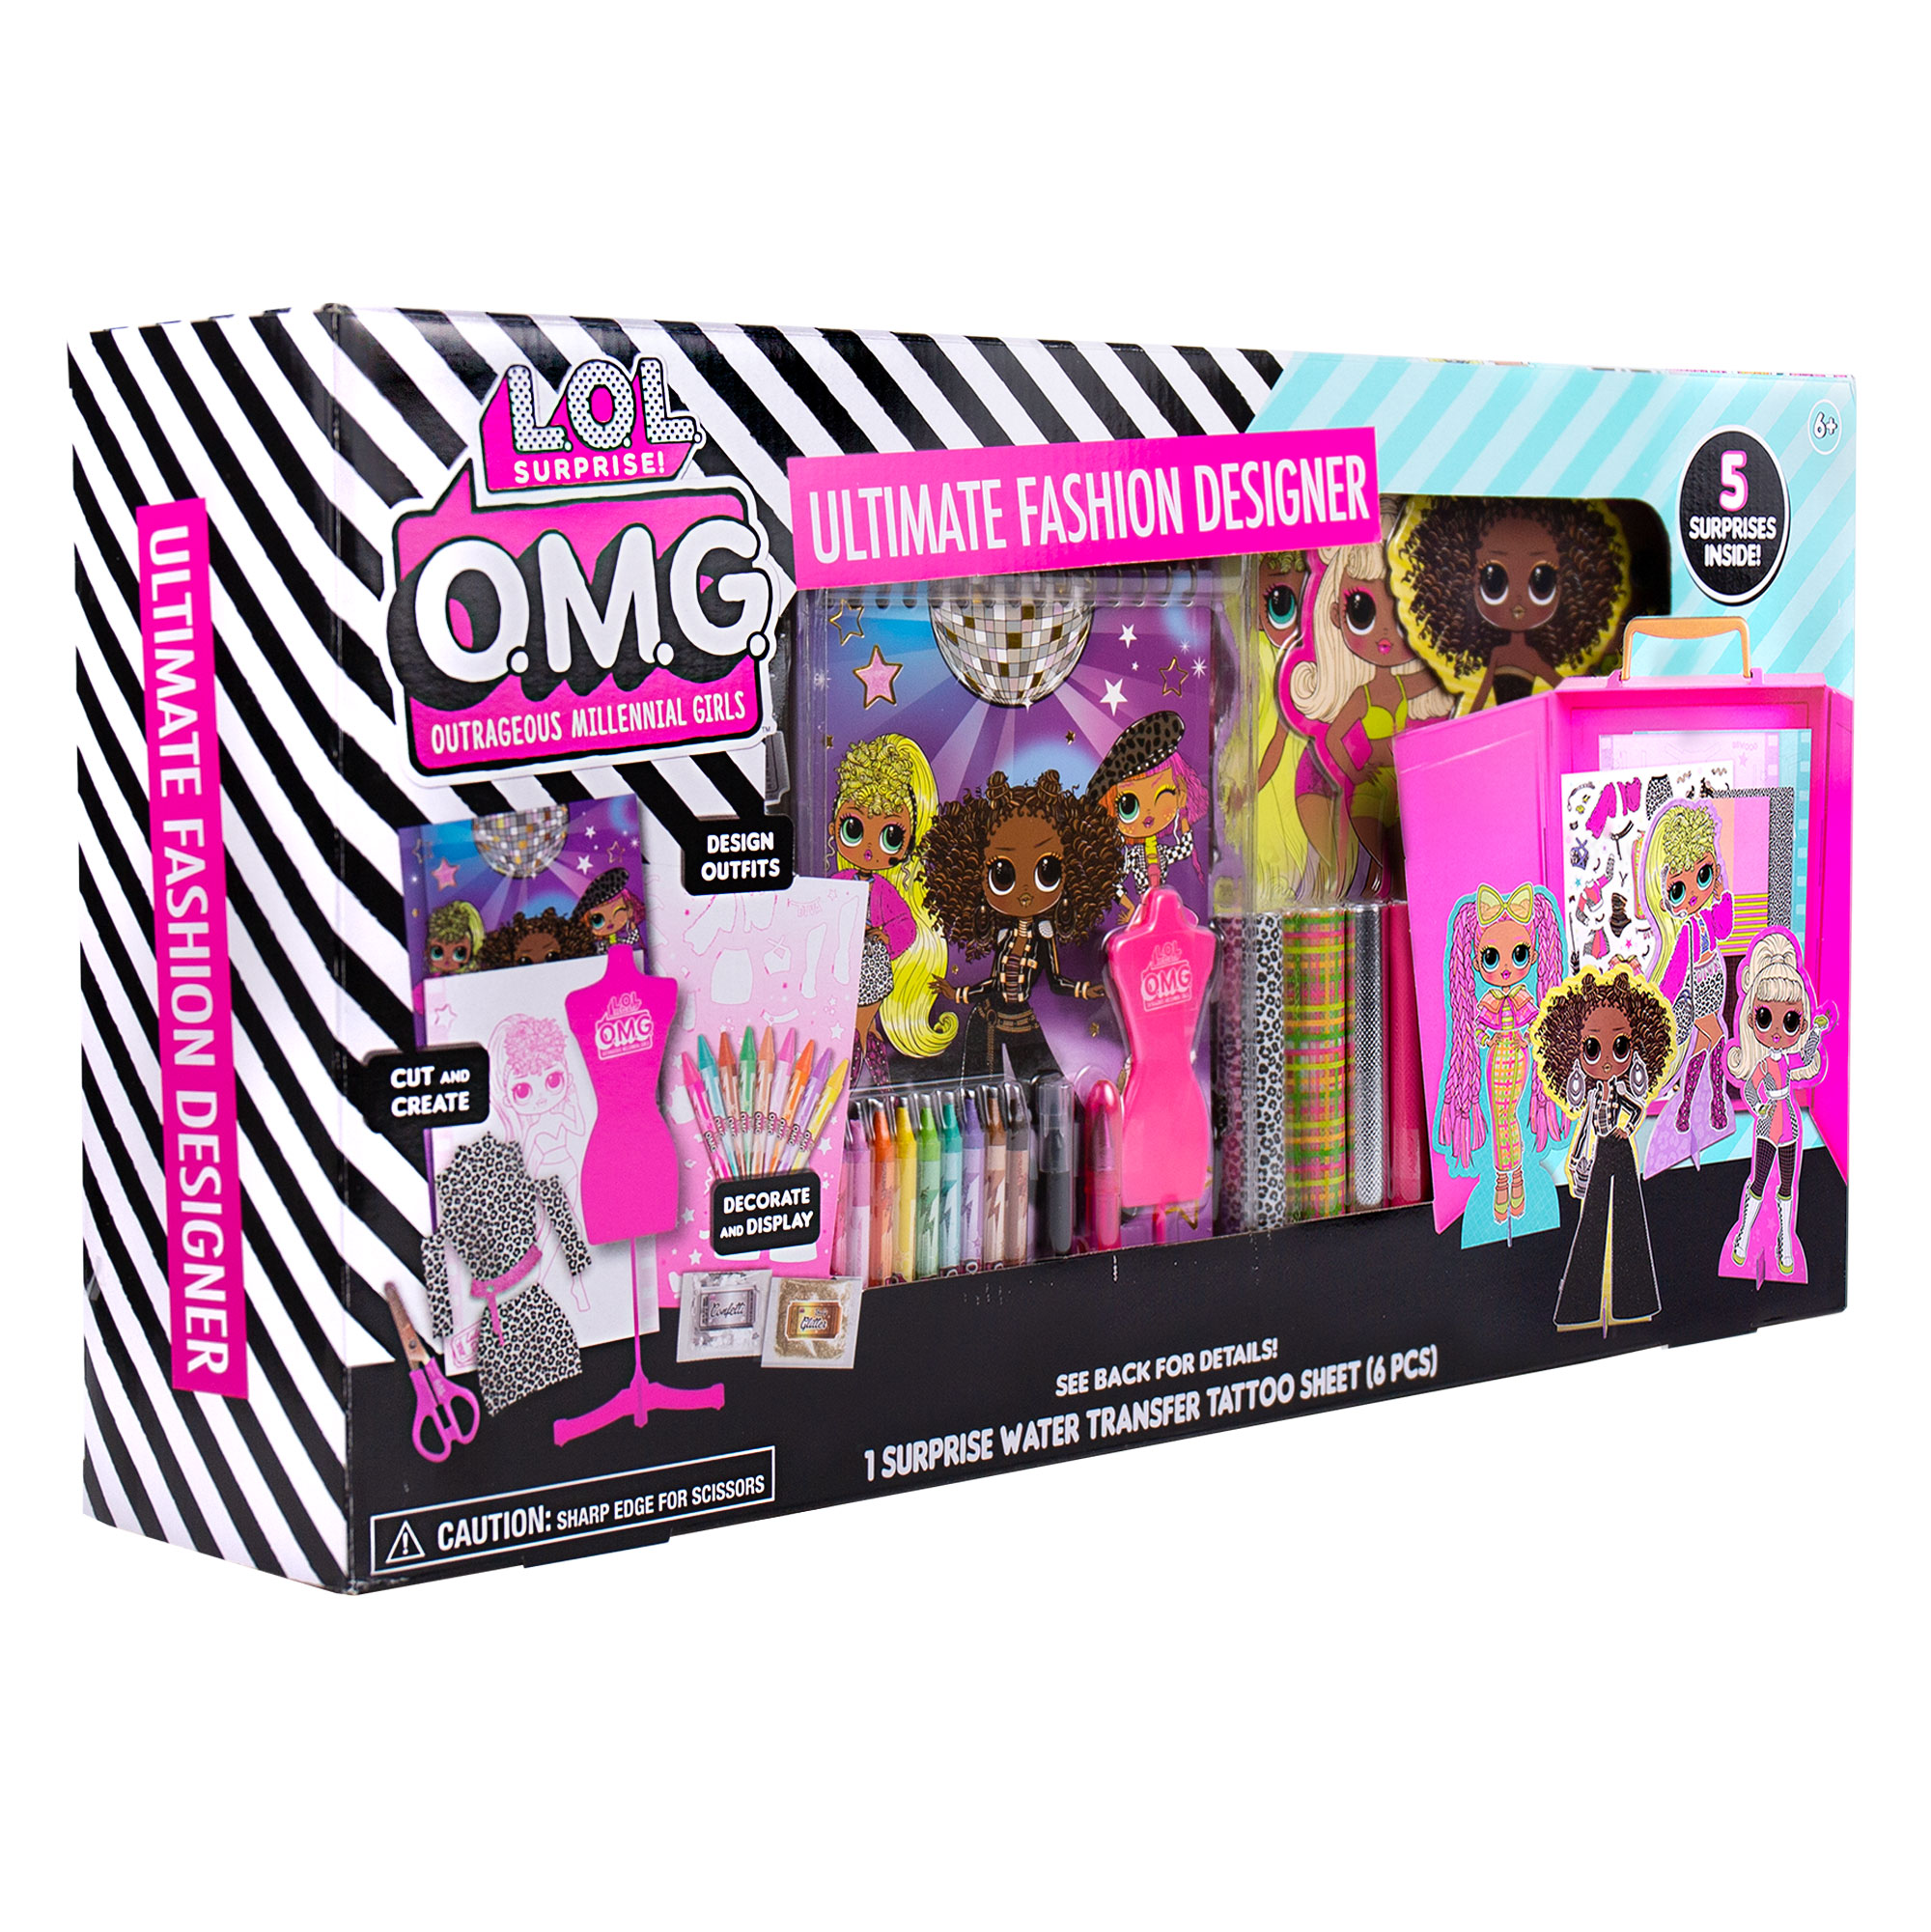 L.O.L. Surprise! O.M.G. Ultimate Fashion Designer, Double Feature Series, Decorate 4 Die-Cut Dolls With 300+ Accessories, 5 Surprises Inside, Includes Reusable Runway Case - image 4 of 5